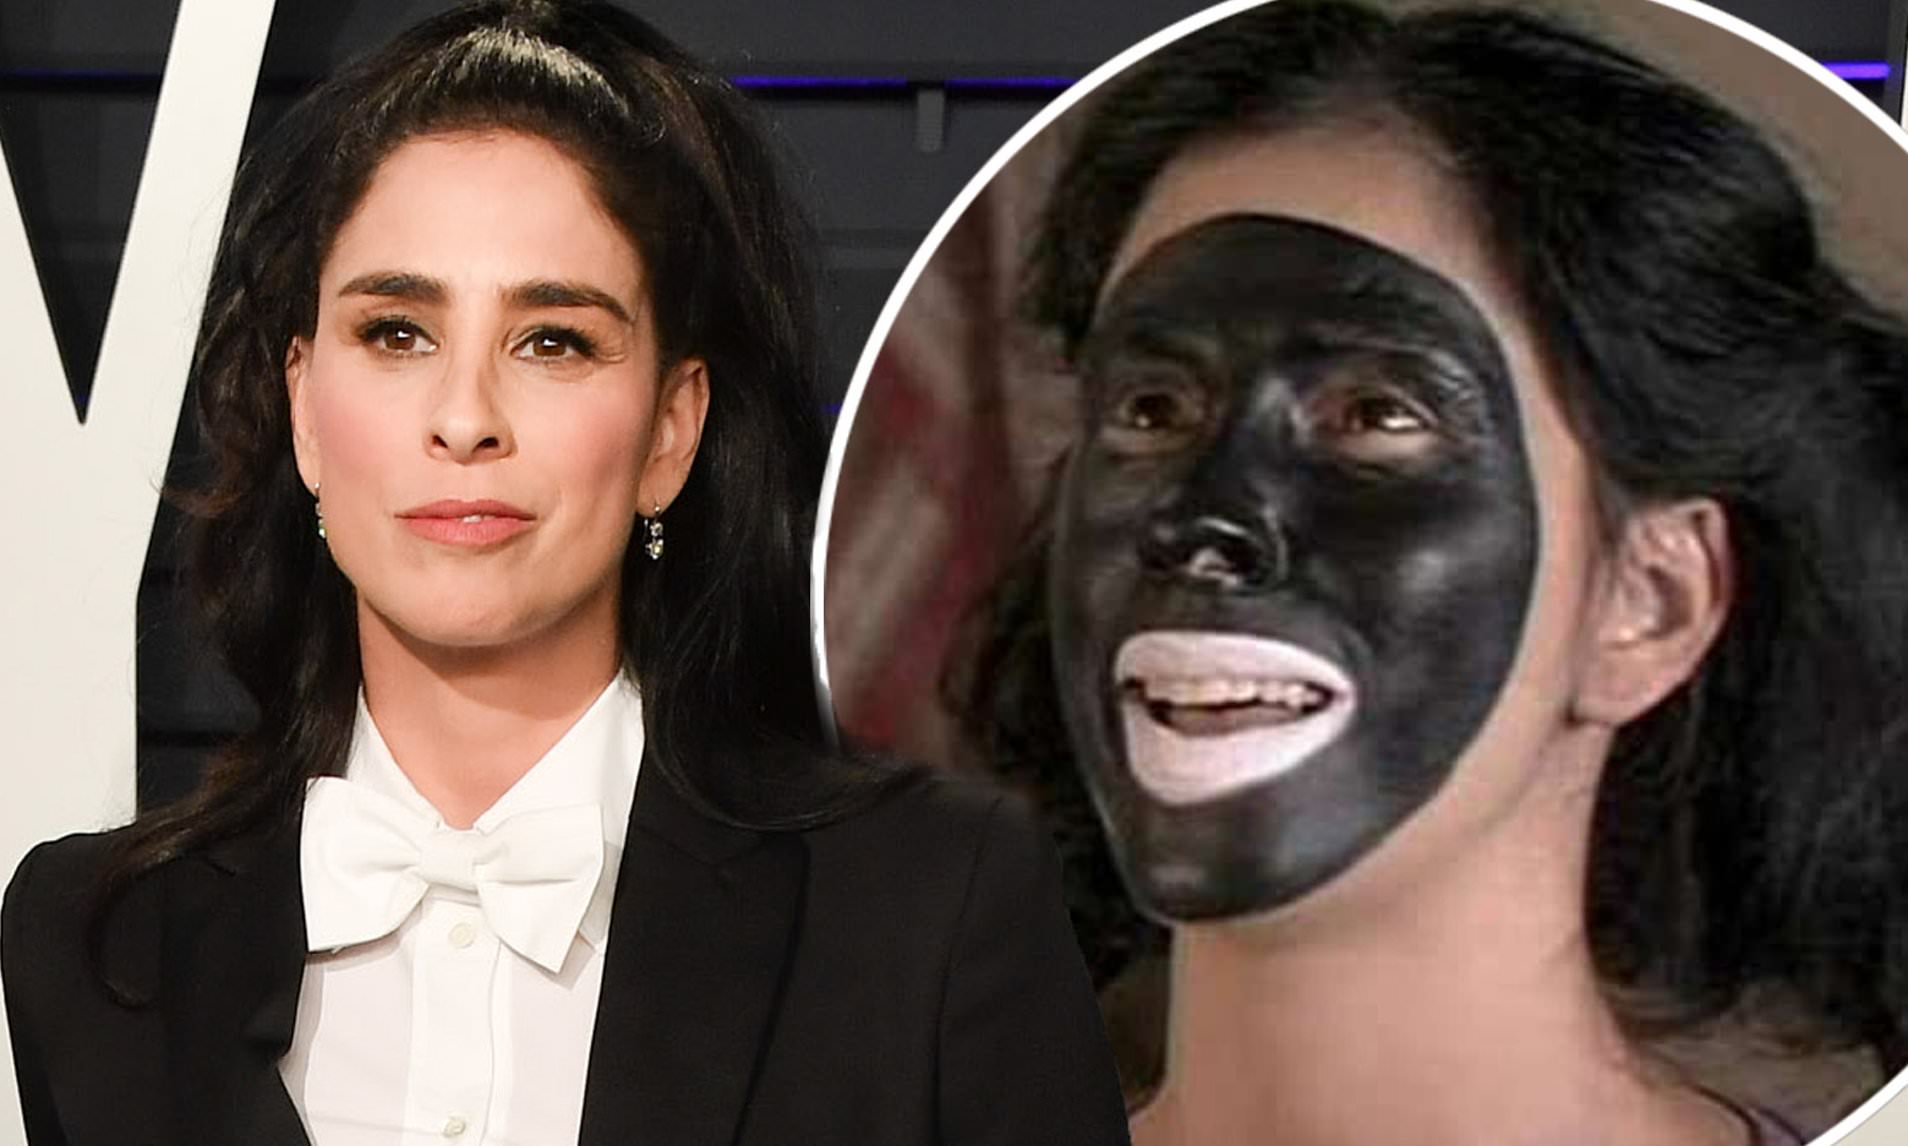 Sarah Silverman Fired From Movie For 2007 Blackface Sketch